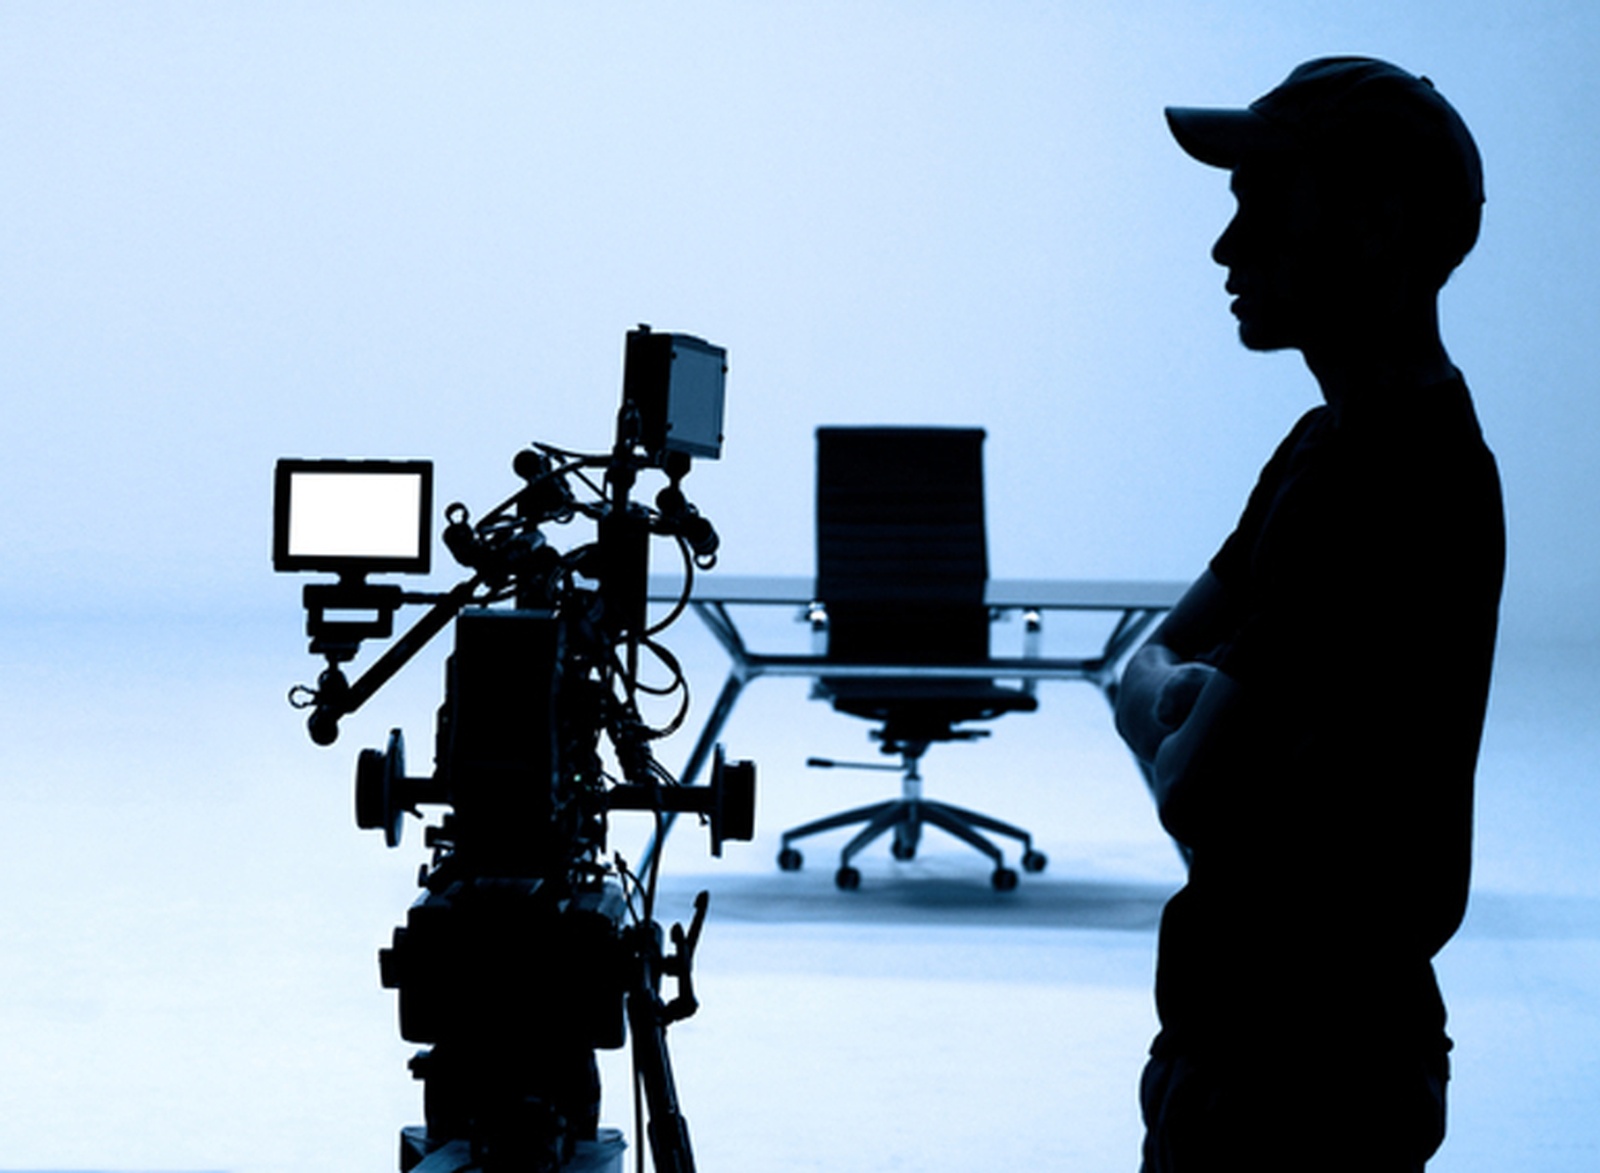 Corporate Video Production & Video Marketing for Businesses in Washington, DC